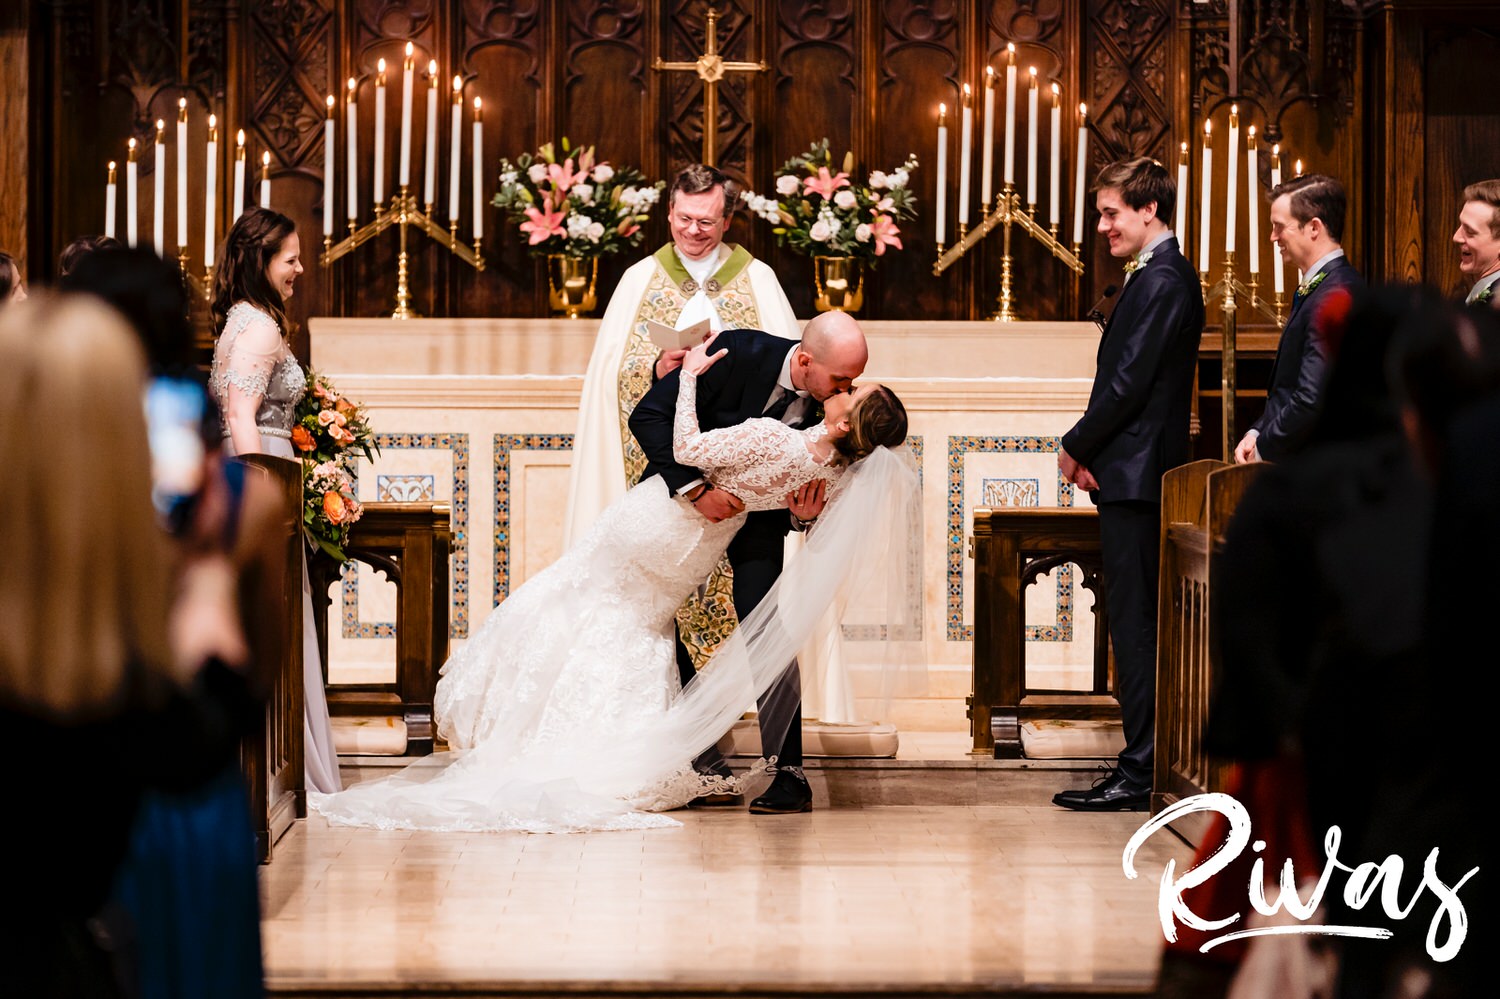 A colorful, wide image taken from the back of the church as a groom dips his bride back during their first kiss at the end of their wedding ceremony. 